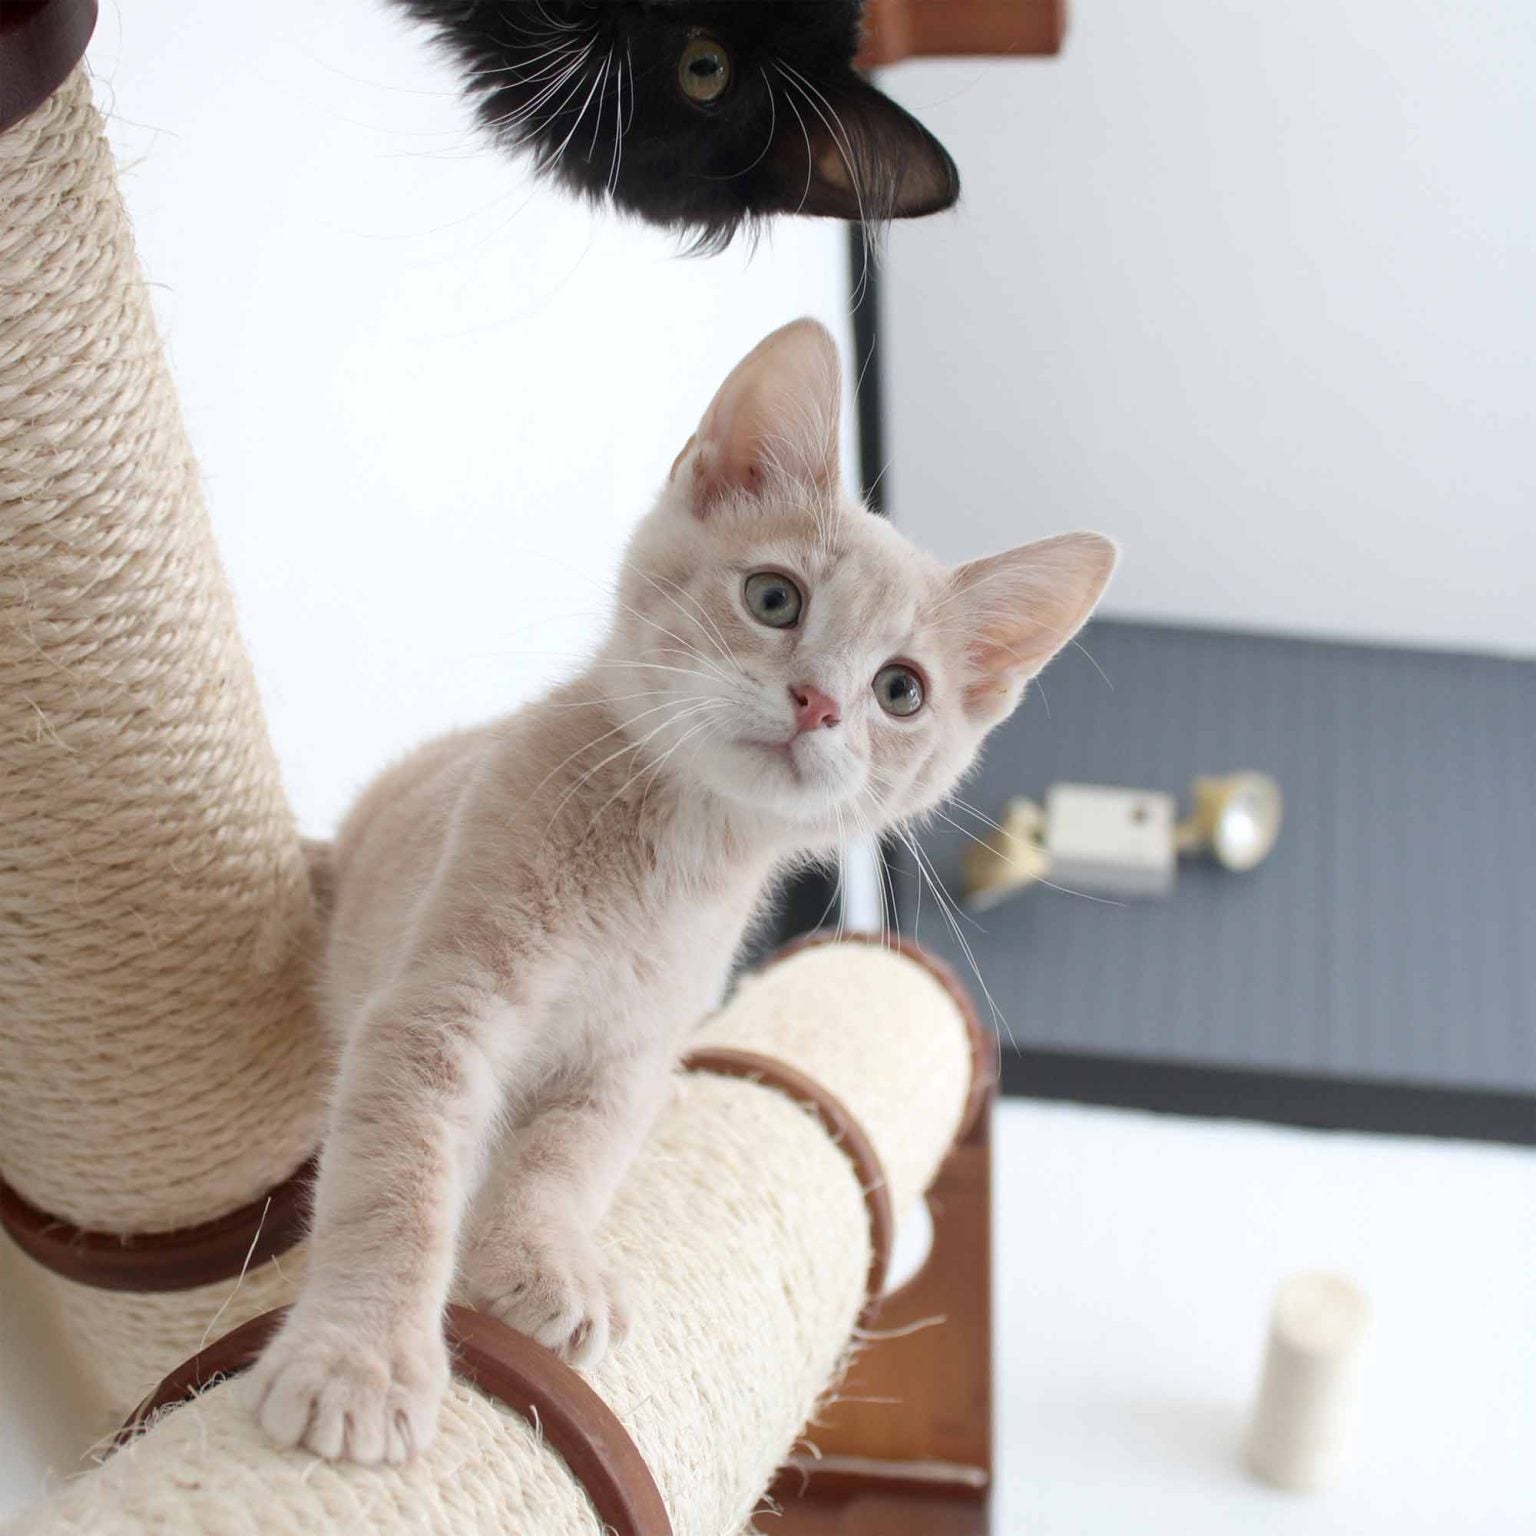 kittens looking curiously at the photographer while climbing on the Crossroads cat scratching posts